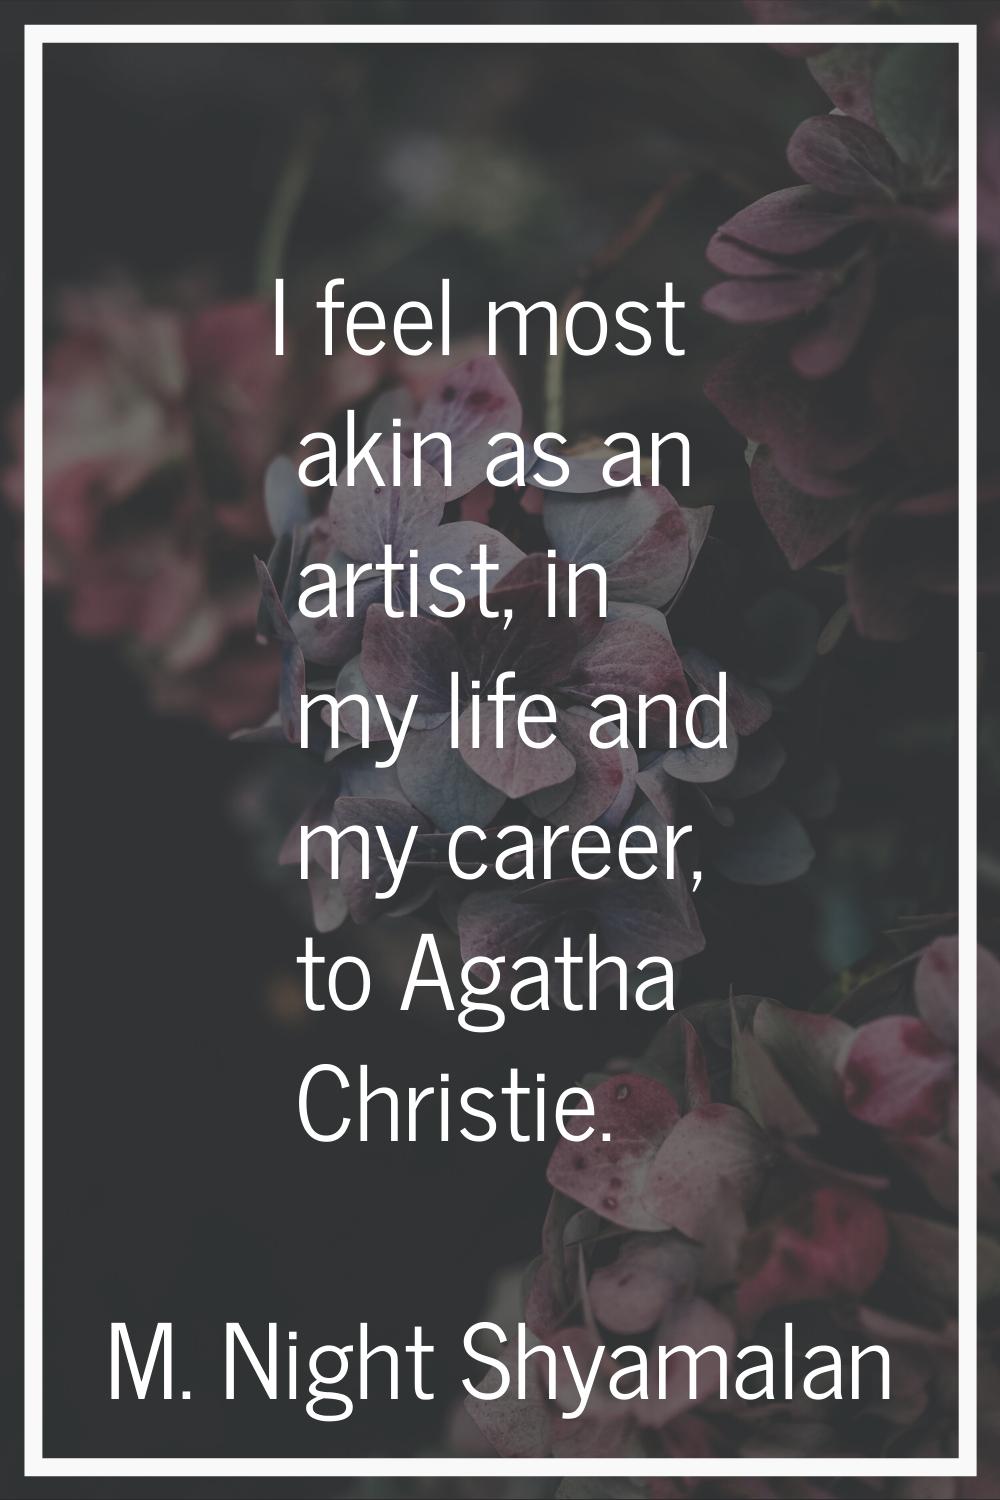 I feel most akin as an artist, in my life and my career, to Agatha Christie.